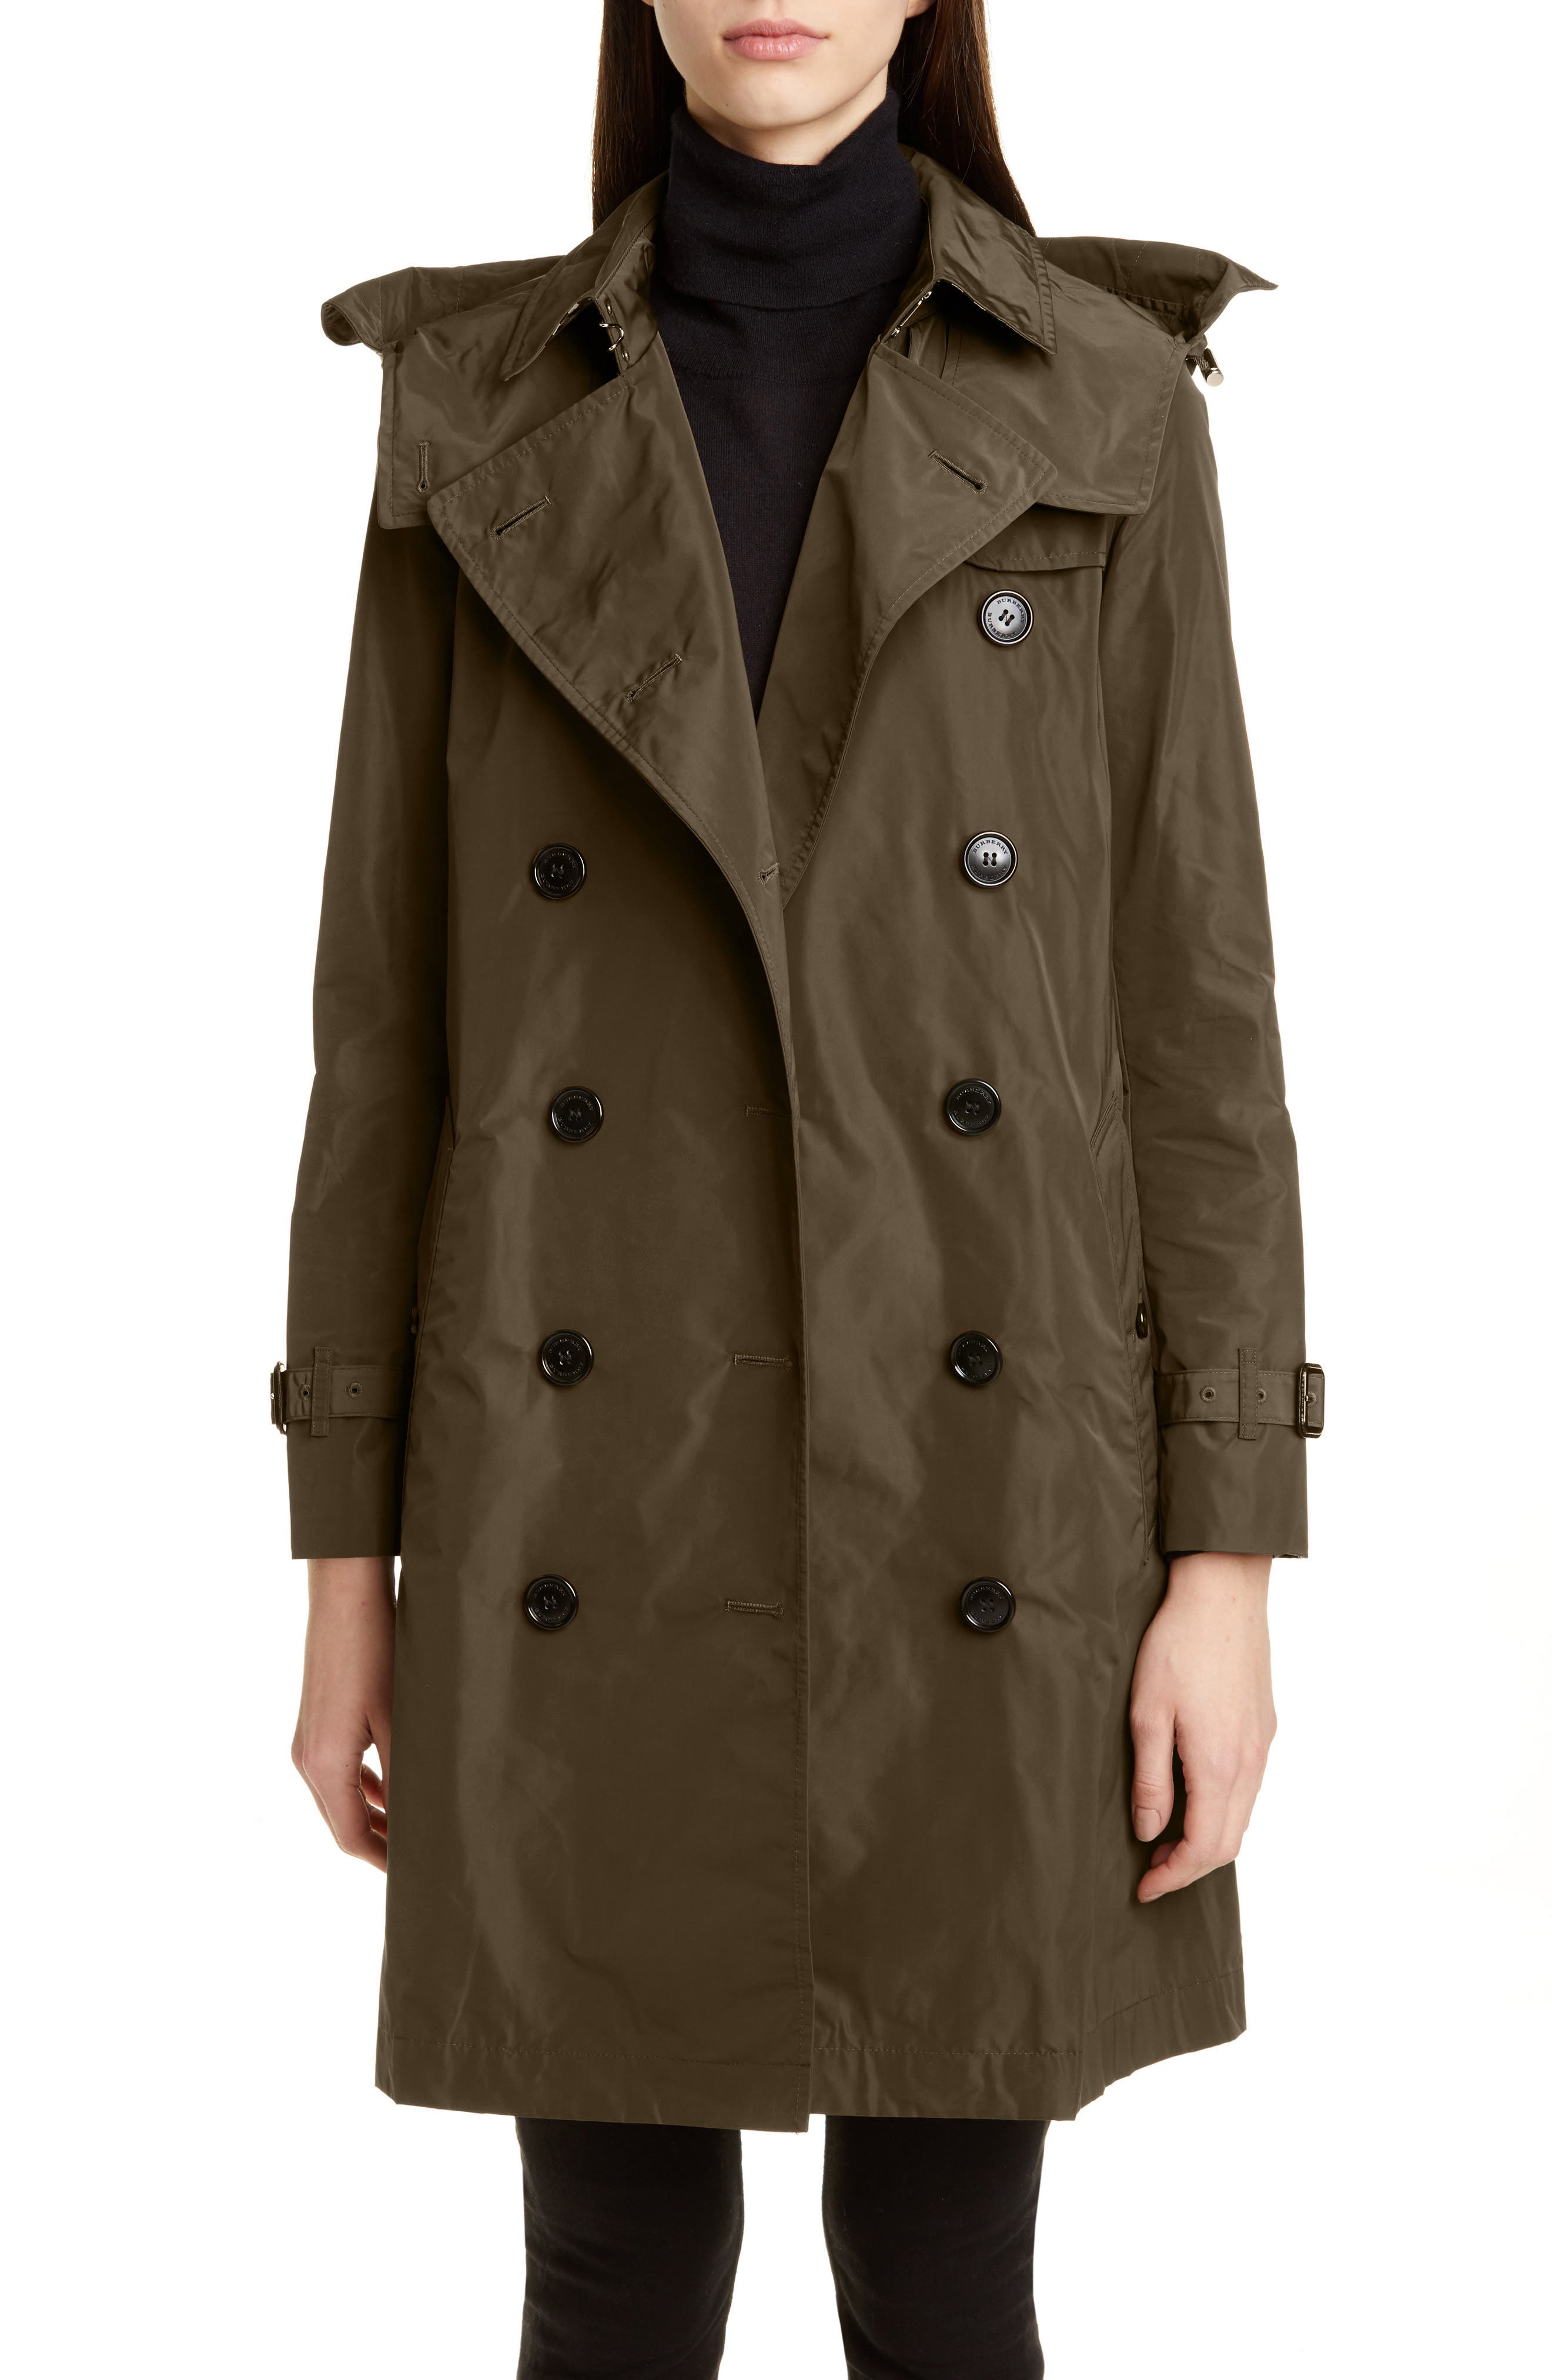 Burberry Kensington Trench Coat with 